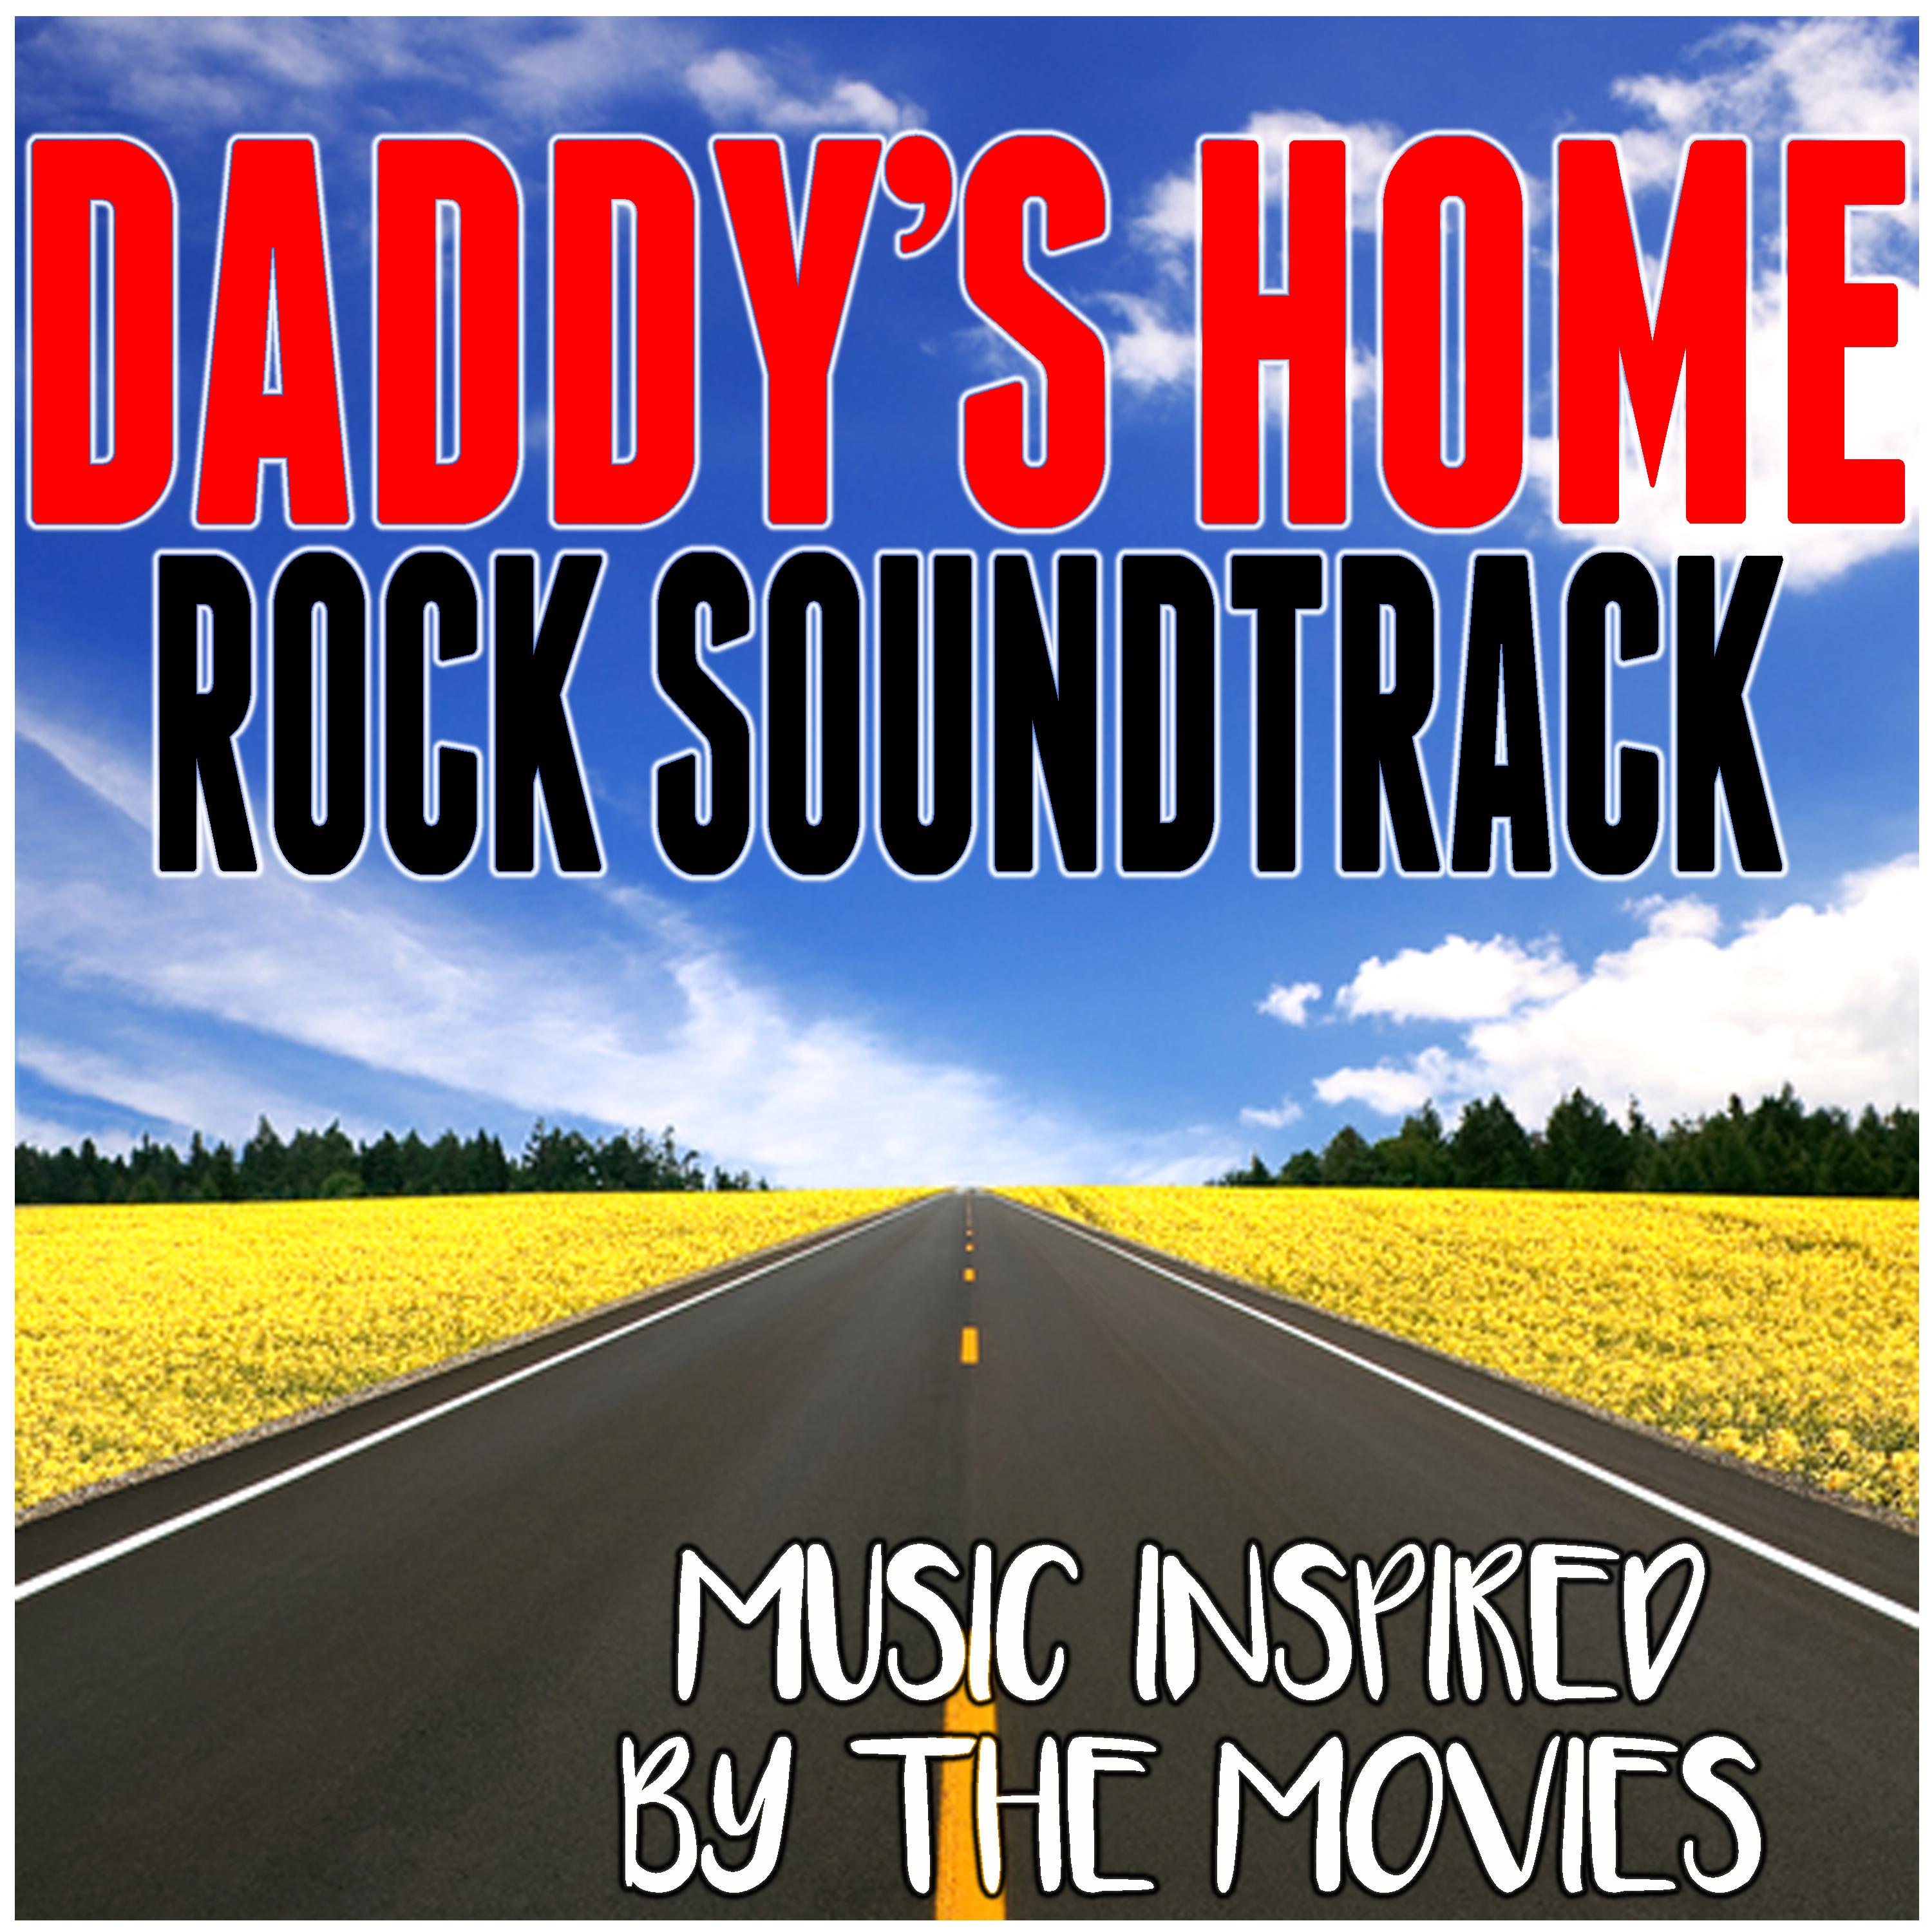 Daddy's Home Rock Soundtrack (Music Inspired By The Movies)